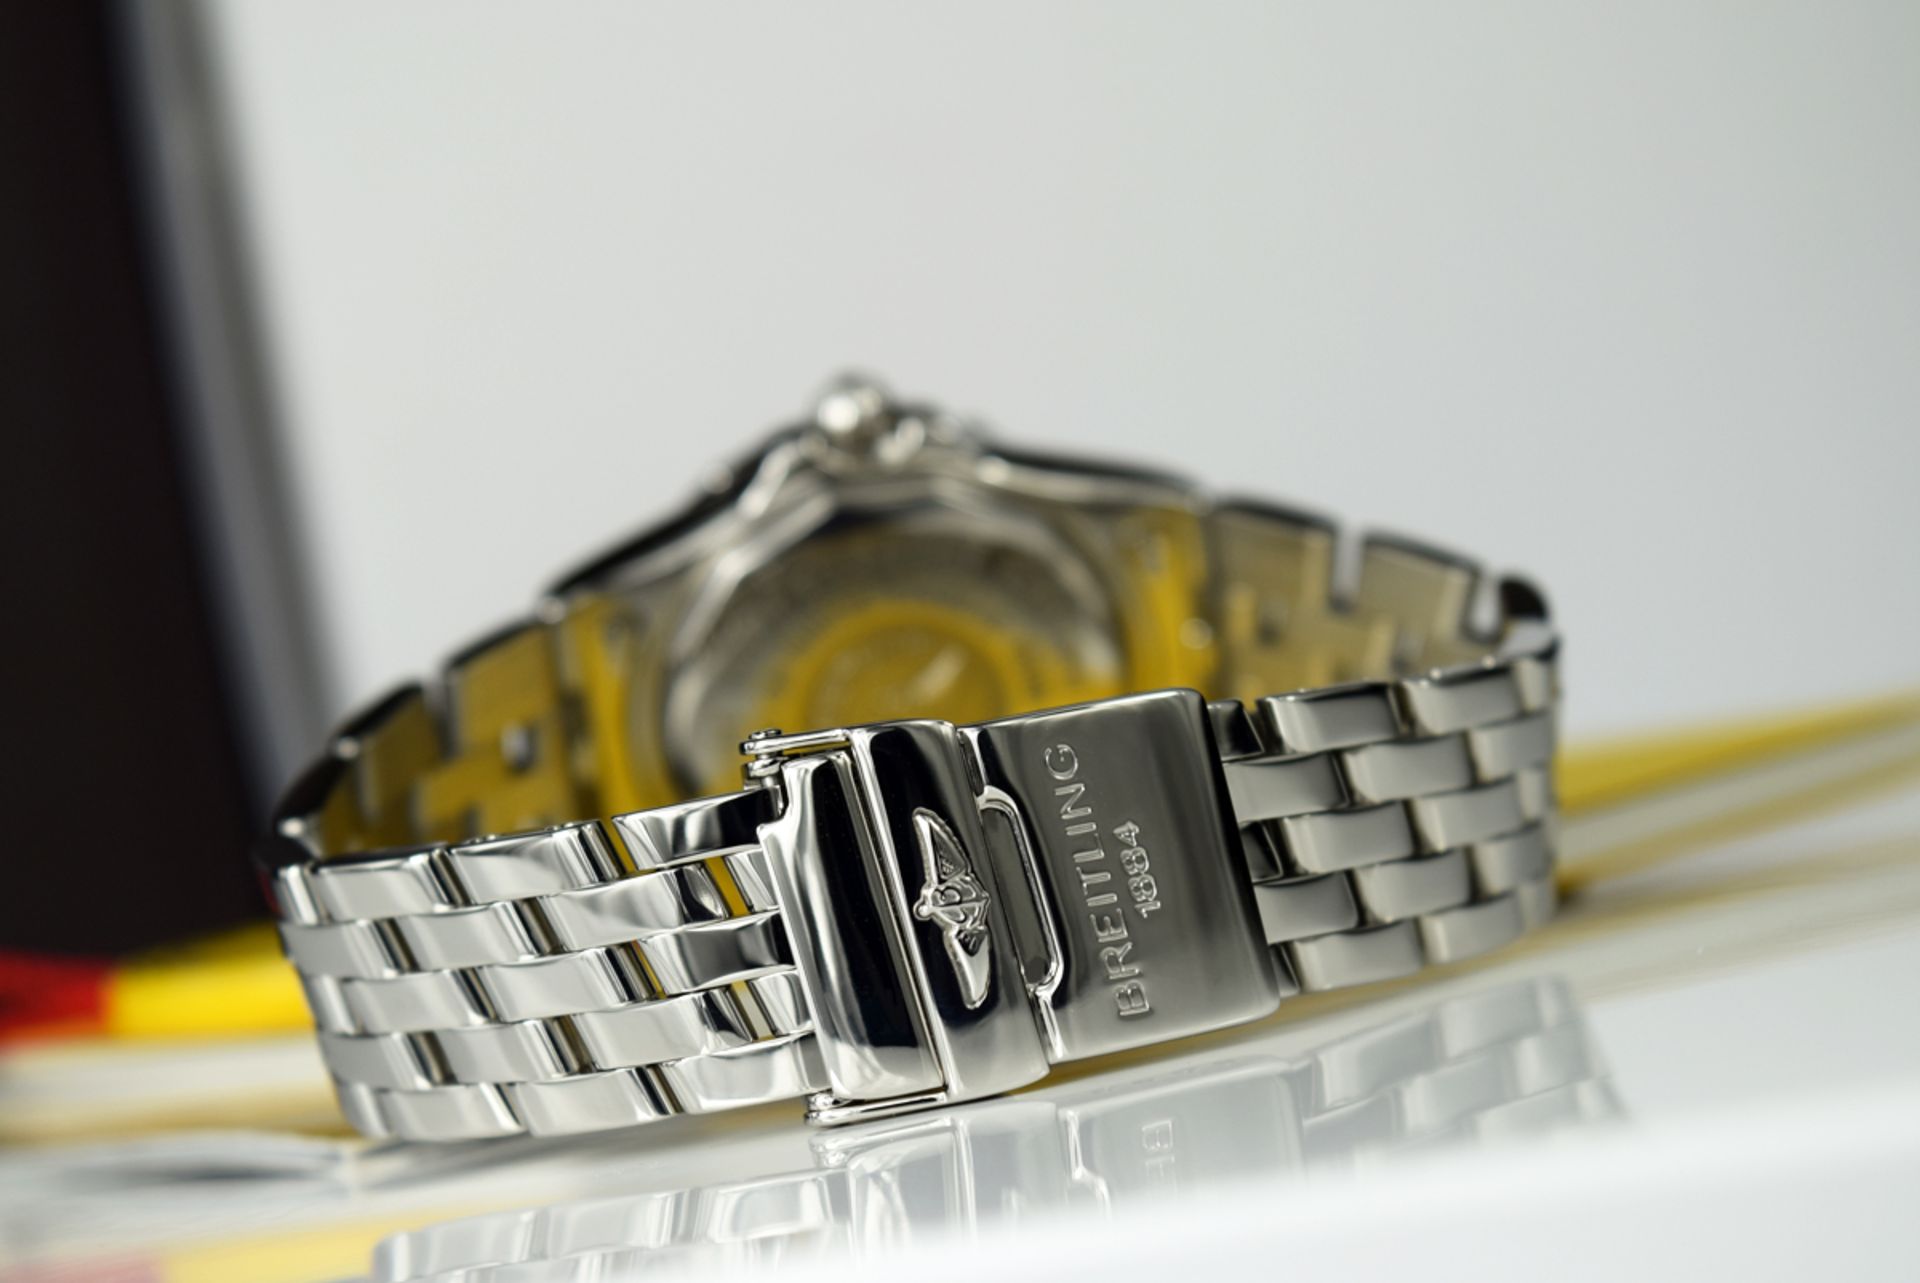 BREITLING - STARLINER 'A71340' - STEEL with DIAMOND DIAL! - Image 8 of 9